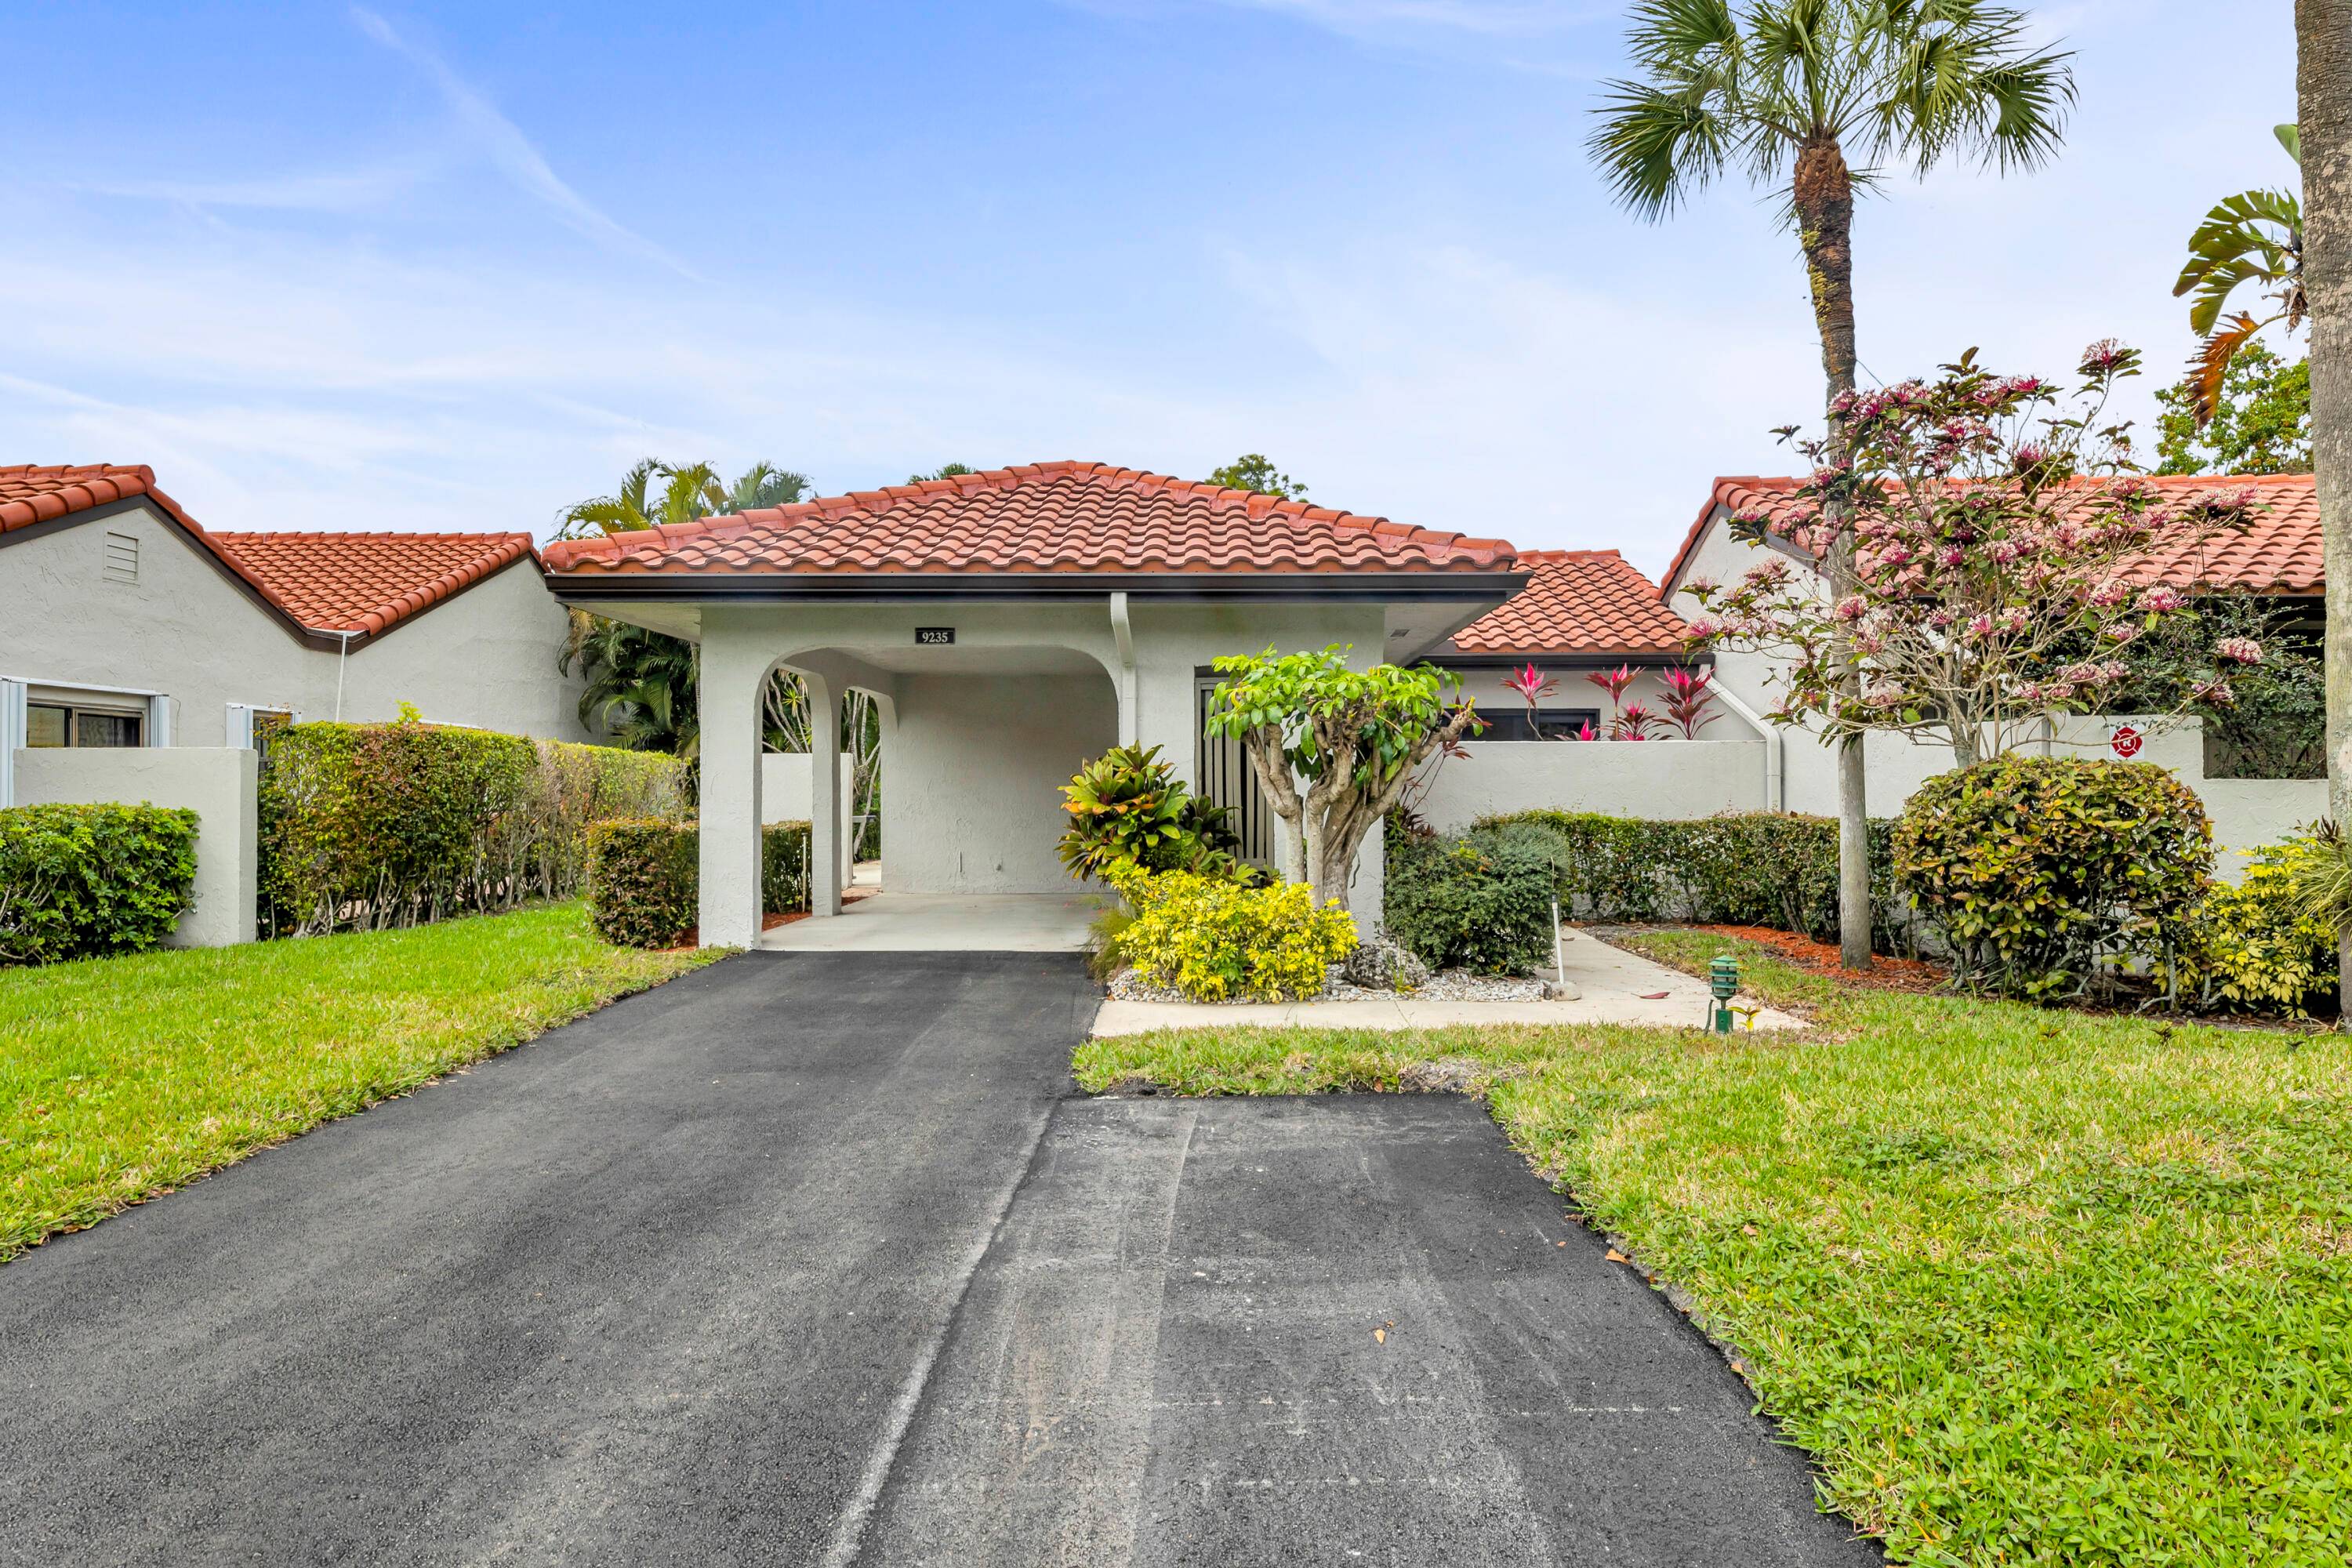 Welcome to your dream home in Boca Lago A beautiful 2 bedroom villa with a bonus room that can serve as a convenient home office or a cozy third bedroom.